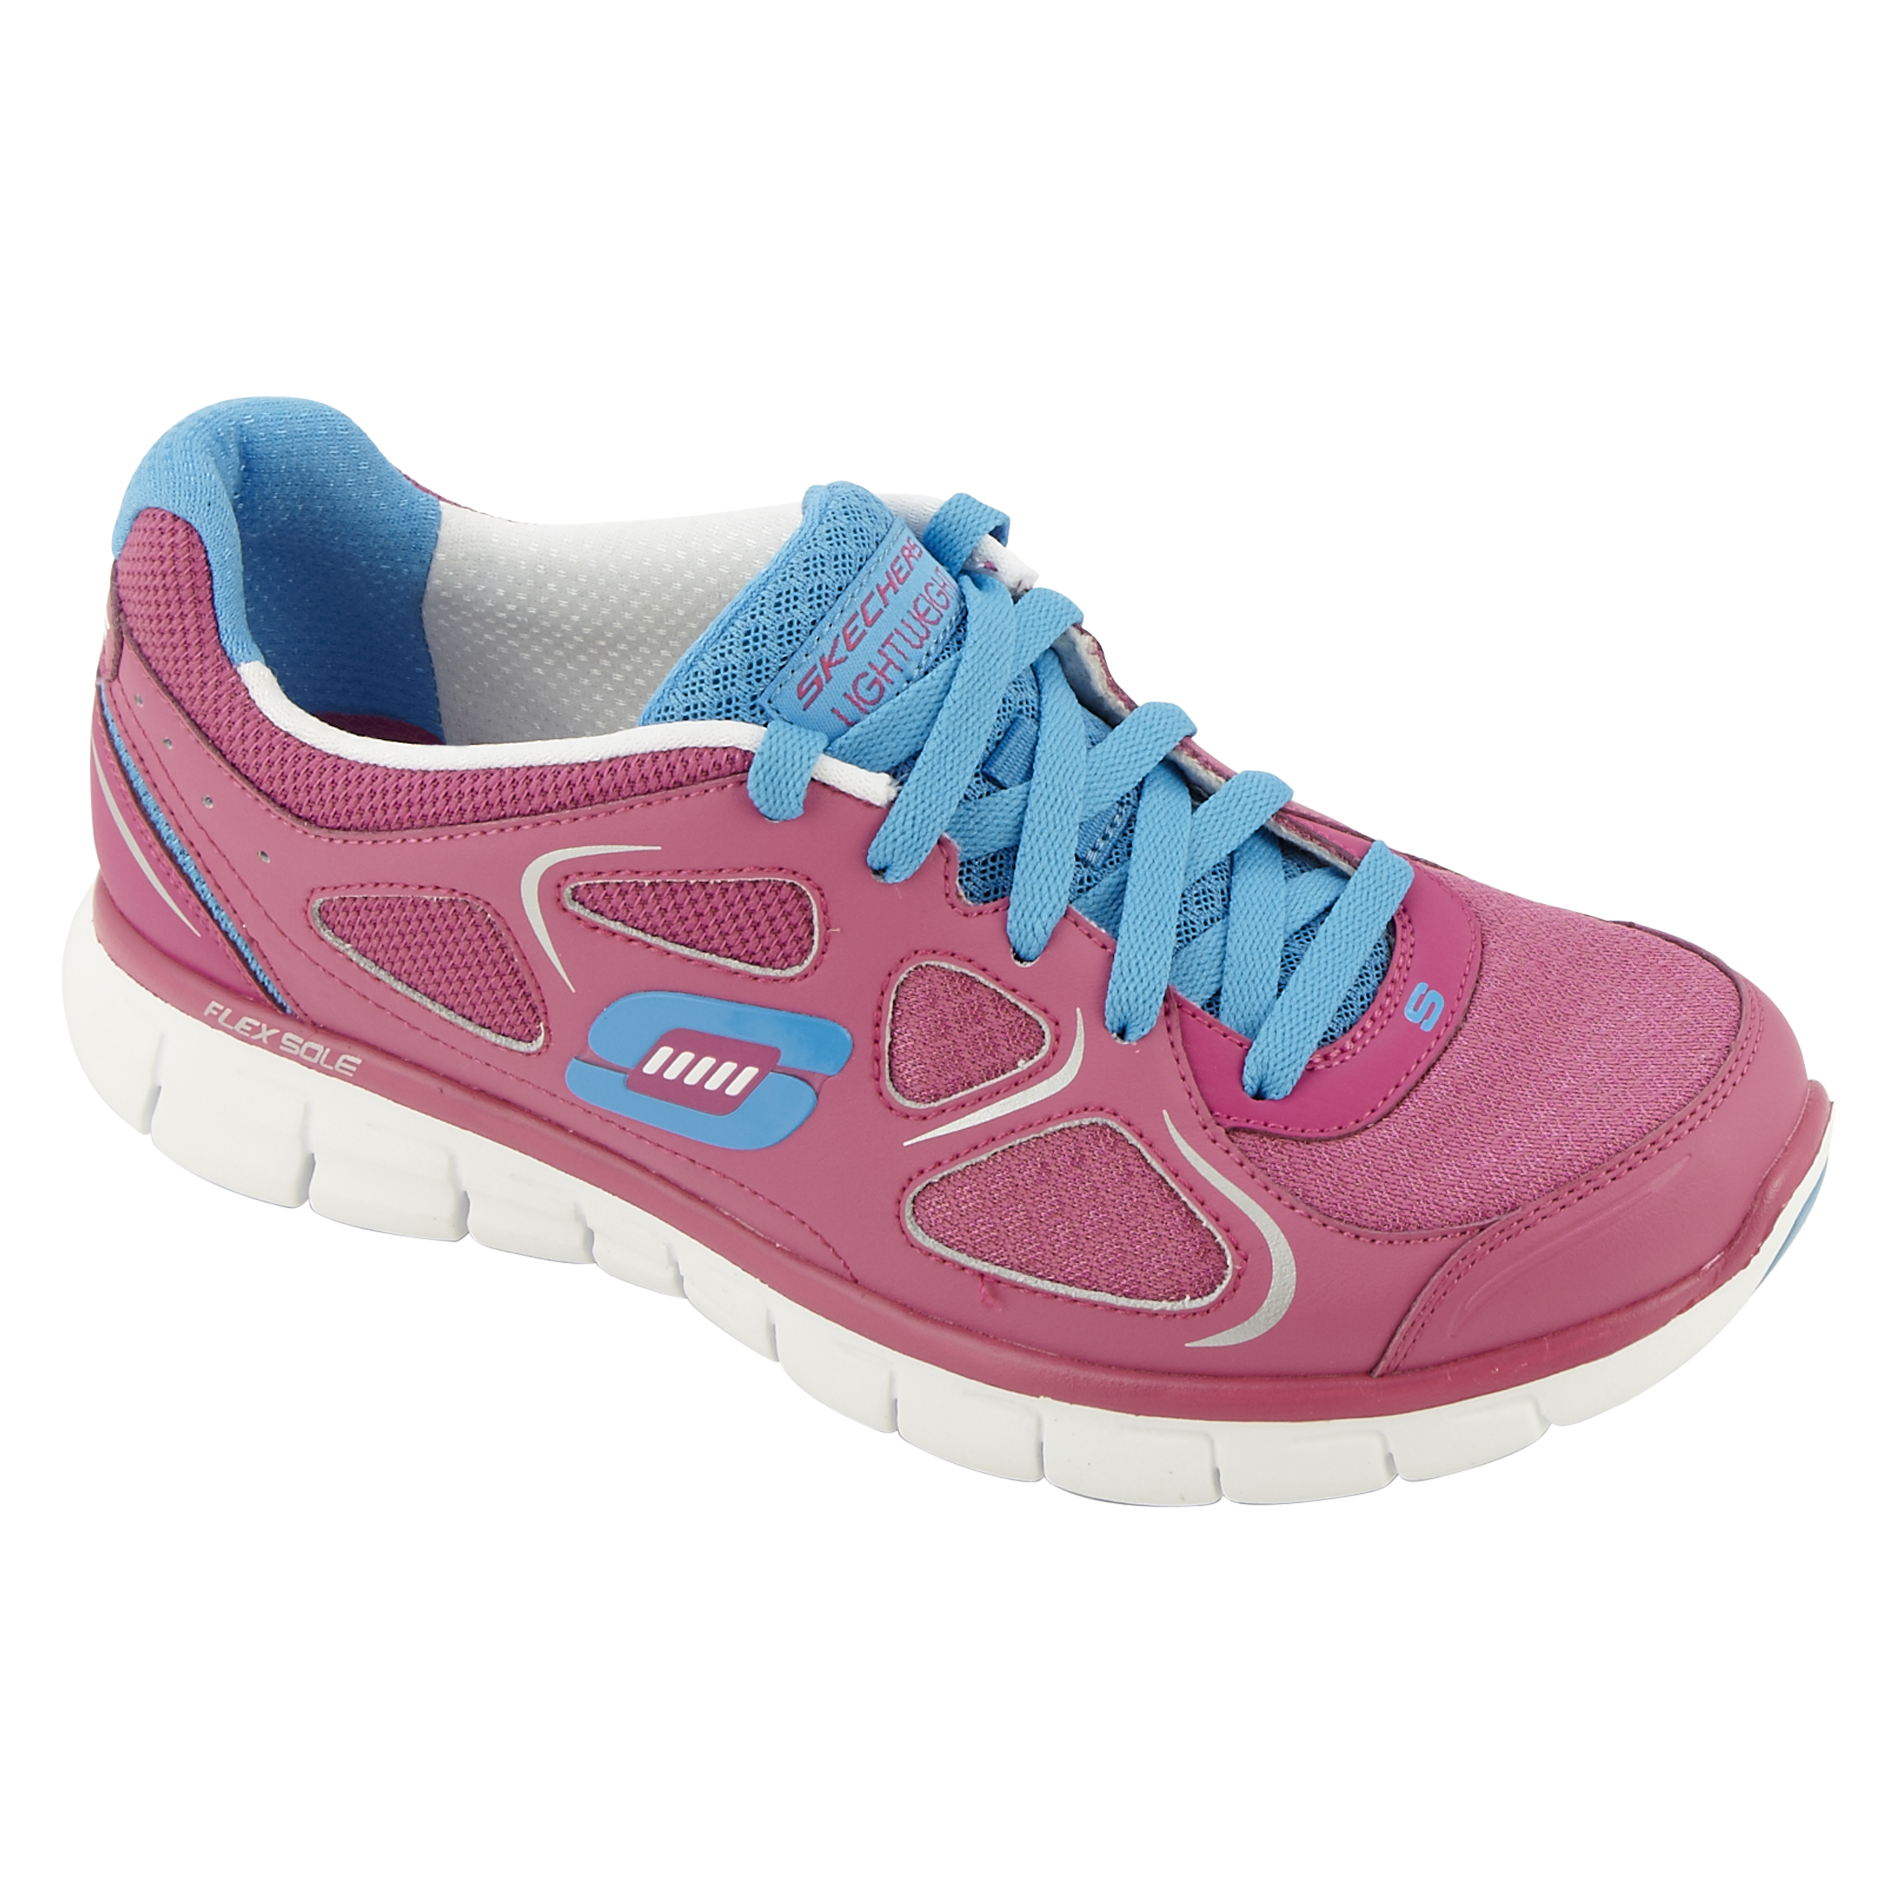 Skechers Women's Pink and Blue Athletic Shoe